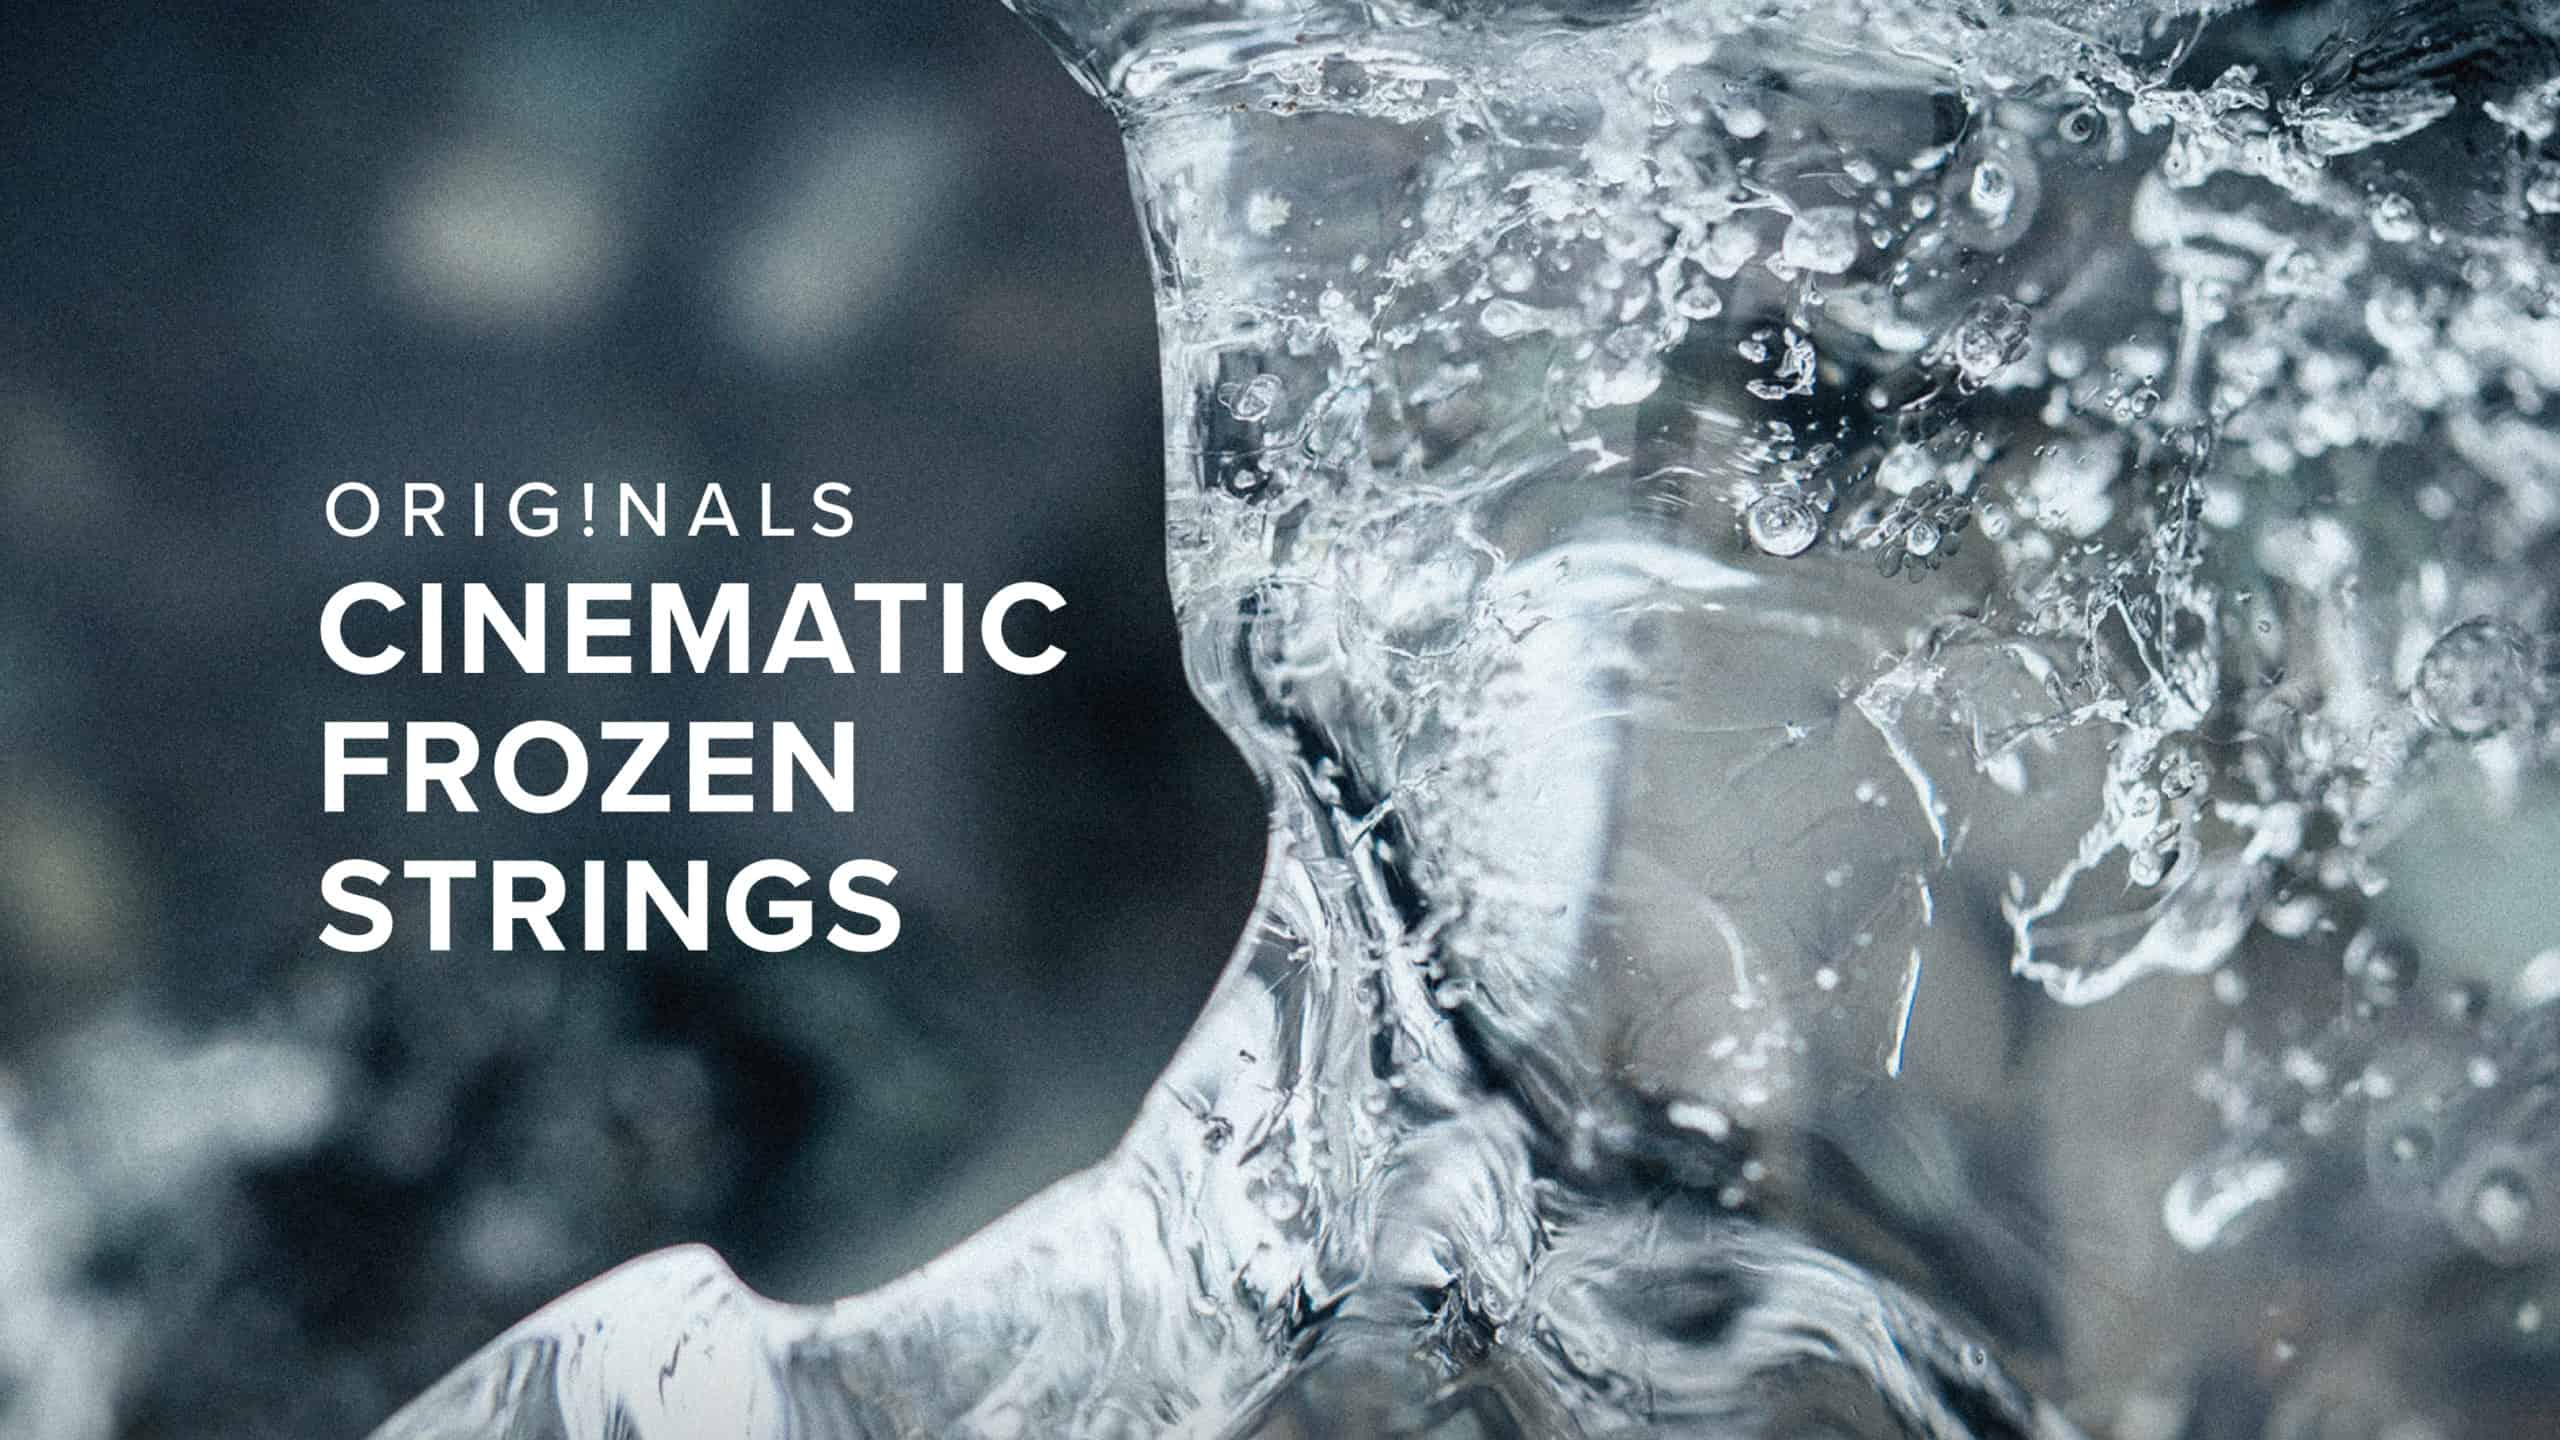 Cinematic Frozen Strings Sound from The Ice smc0453 letterbox scaled